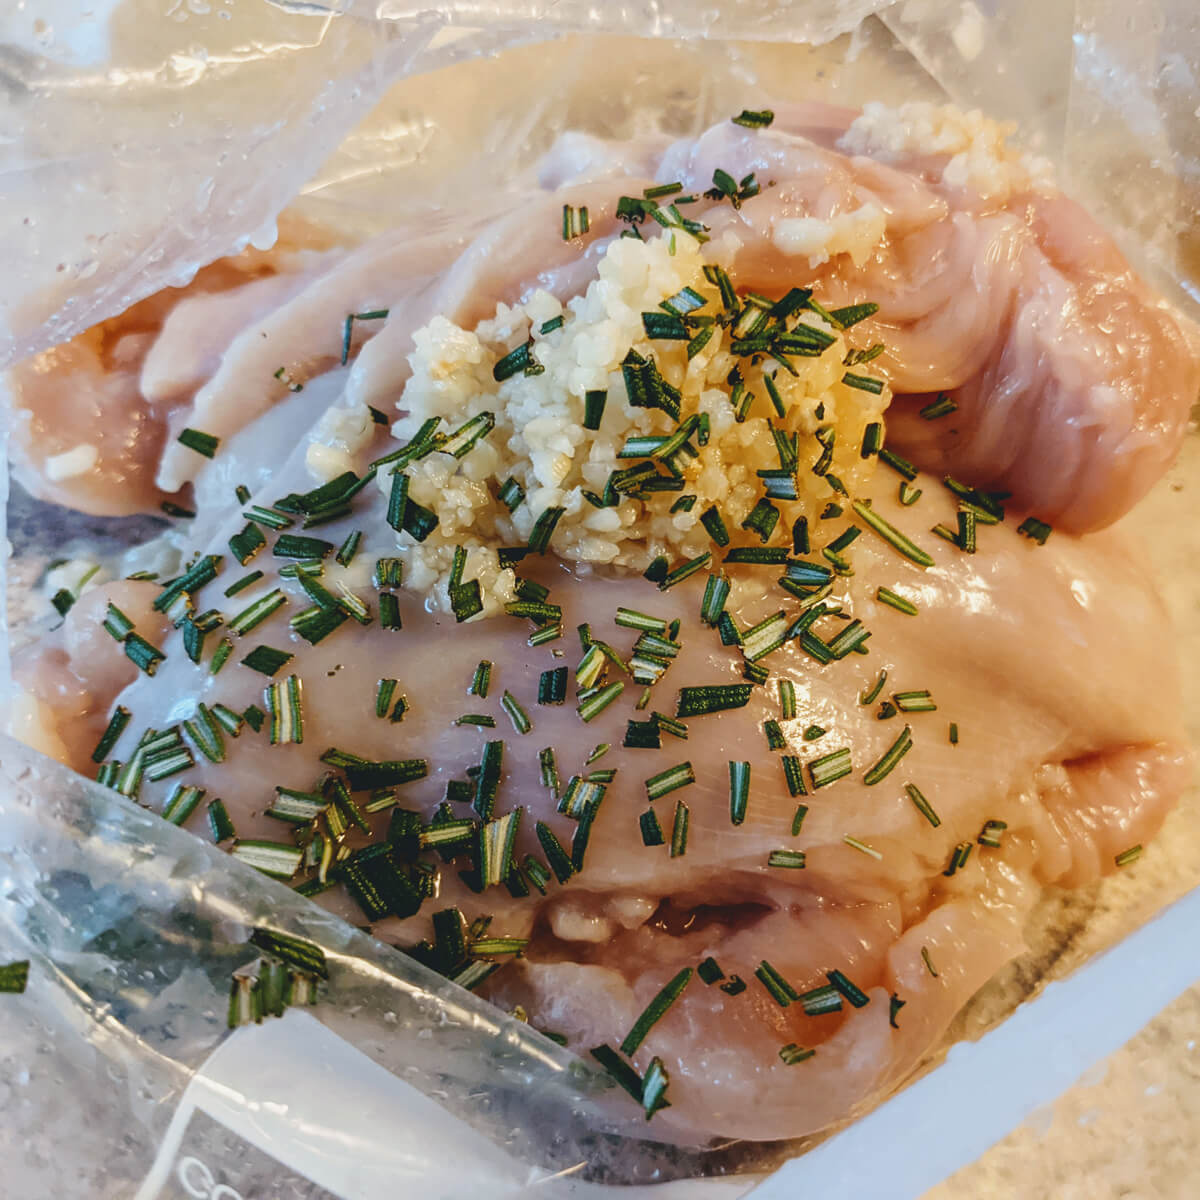 Poultry Seasoning Substitute Ideas - Rosemary and Garlic on Raw Chicken in a Plastic Baggie